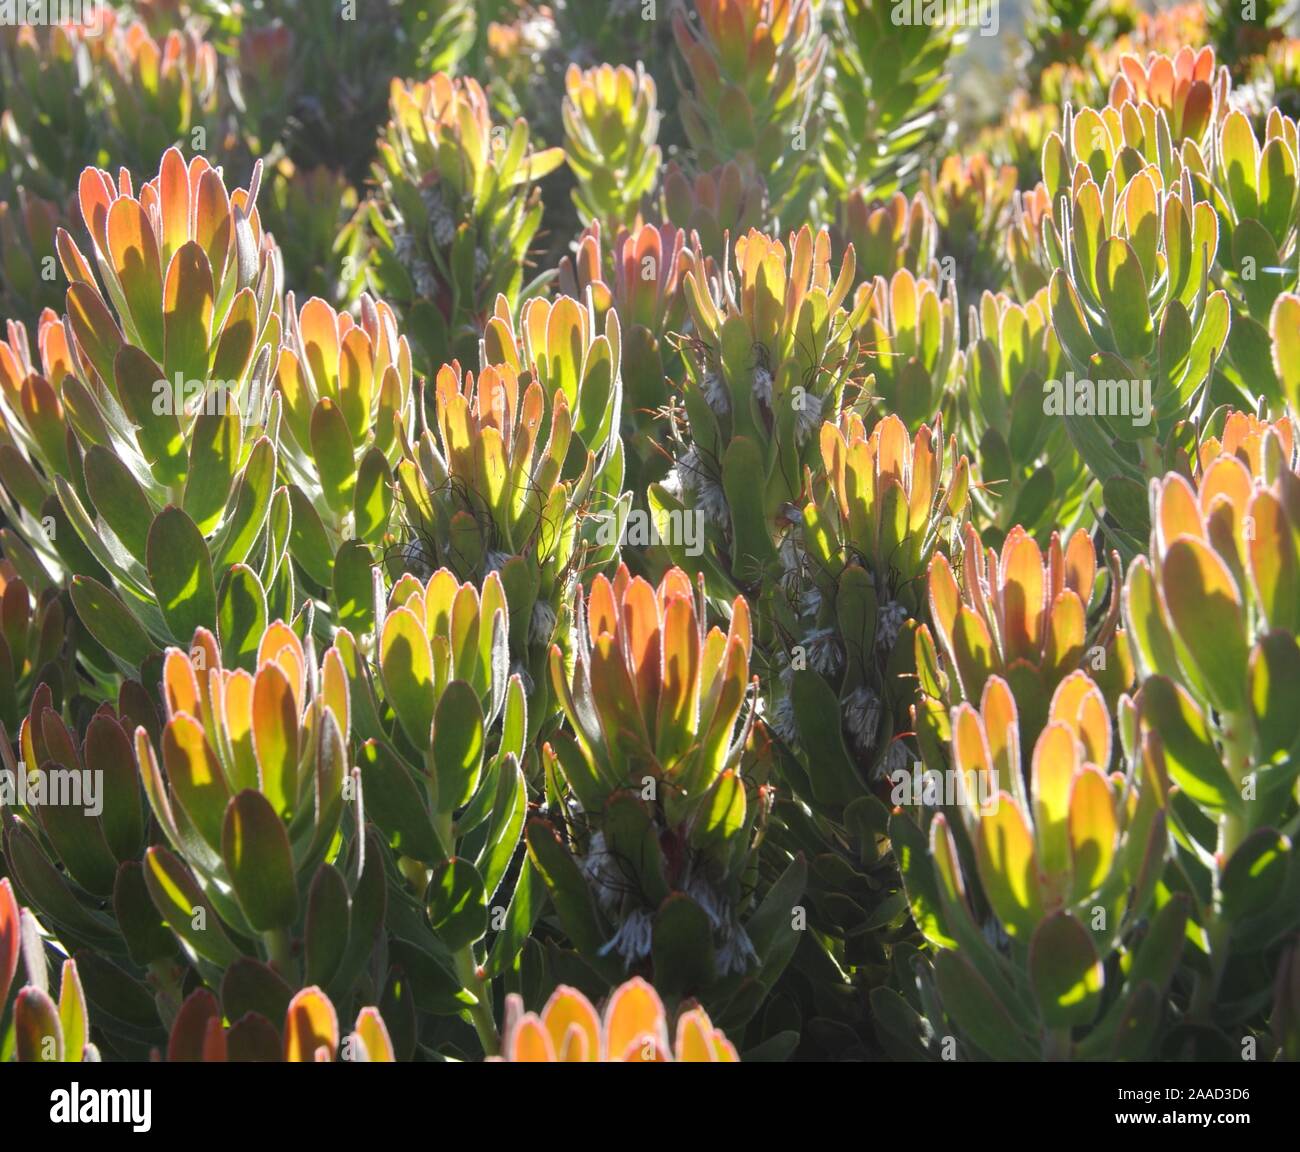 Proteas bathed in sunlight Stock Photo